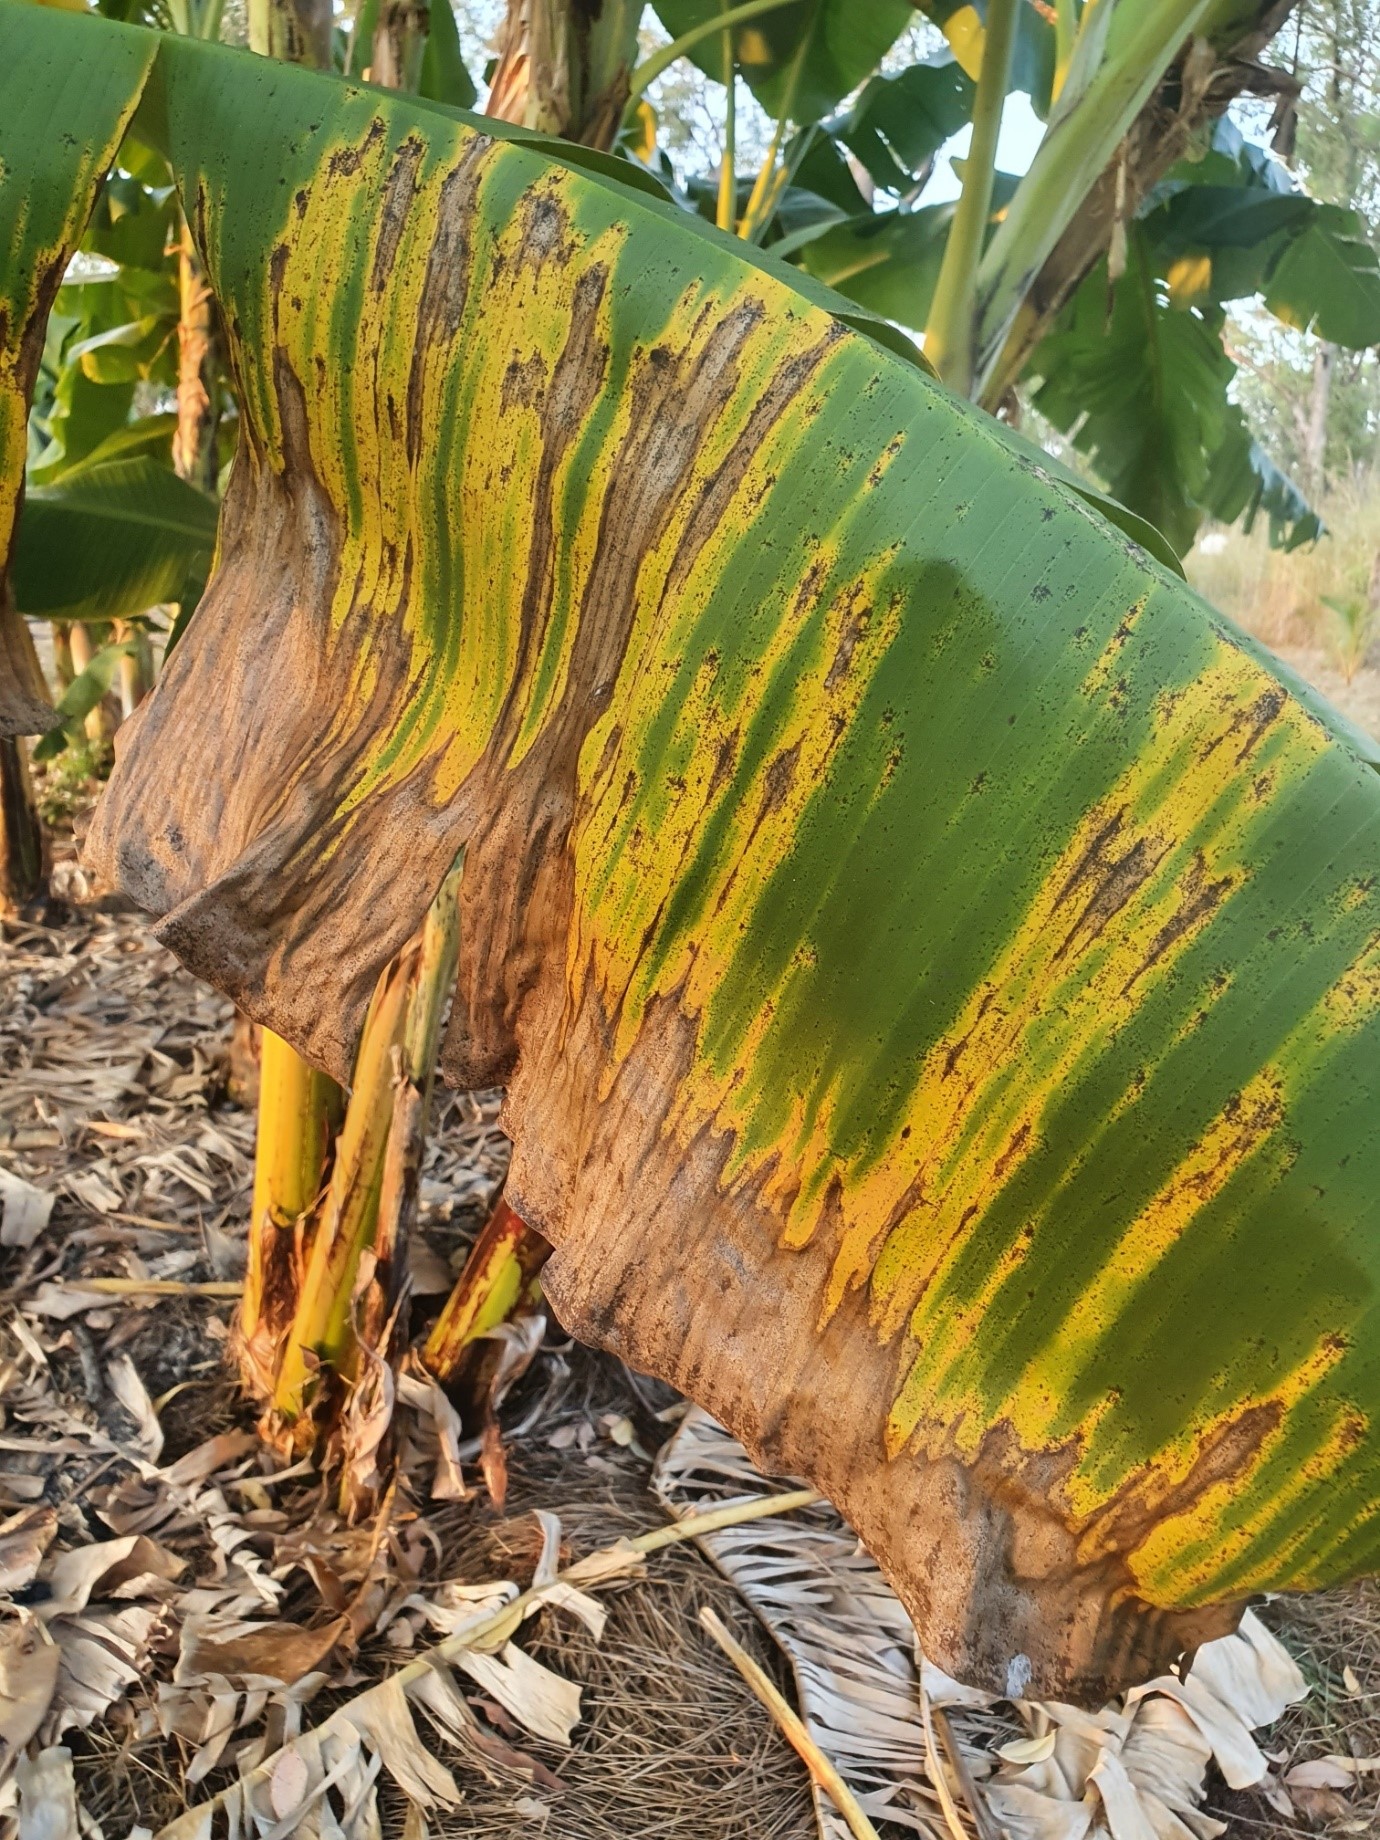 Leaves on a plant with banana freckle